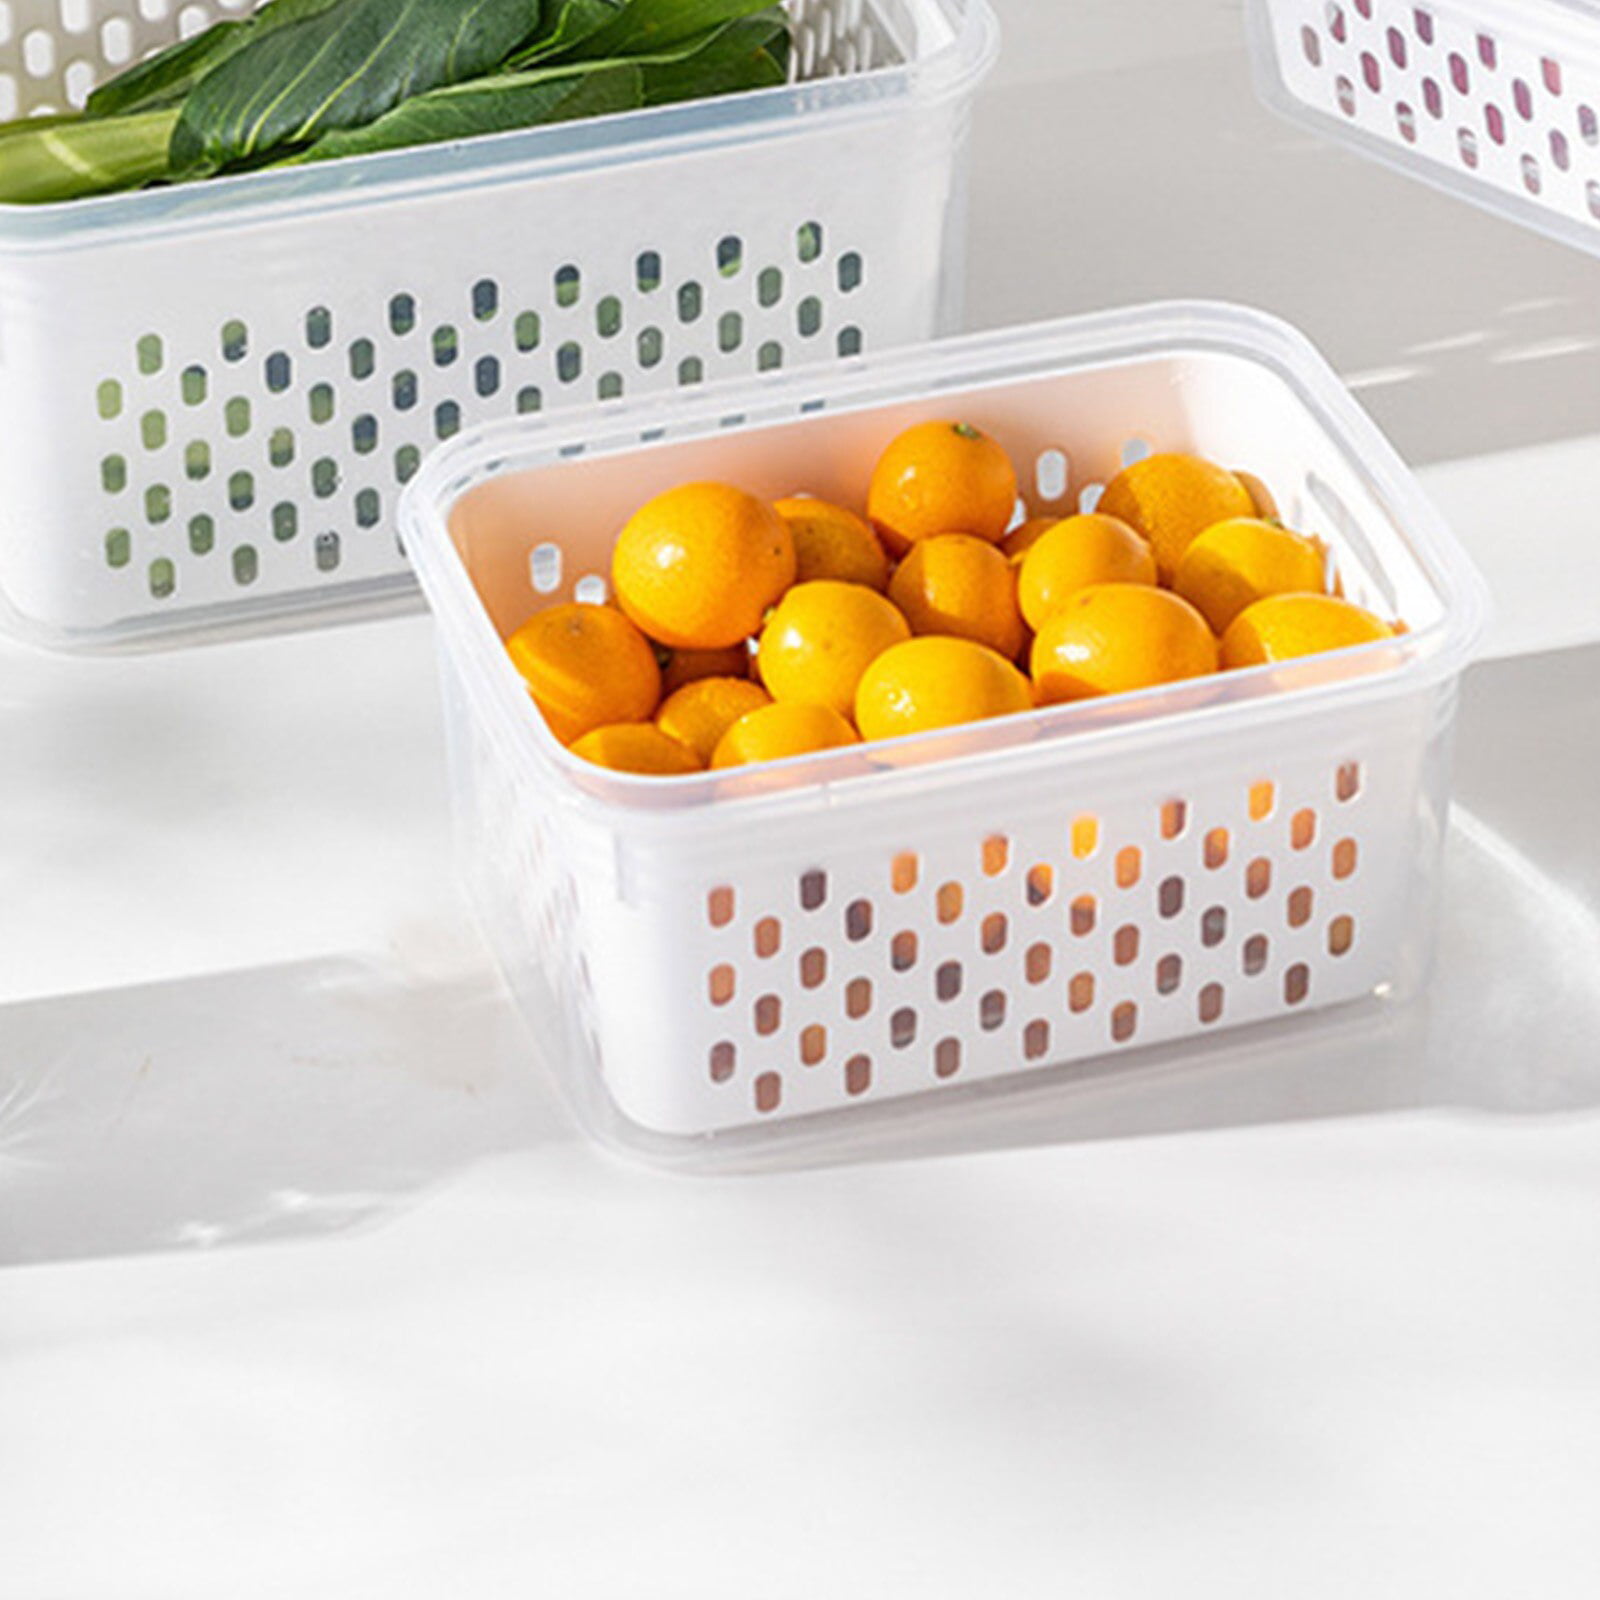 Rtteri 8 Pack Fruit Storage Containers for Fridge Produce Saver Containers  for Refrigerator with Drain Colander Plastic Produce Keepers Refrigerator